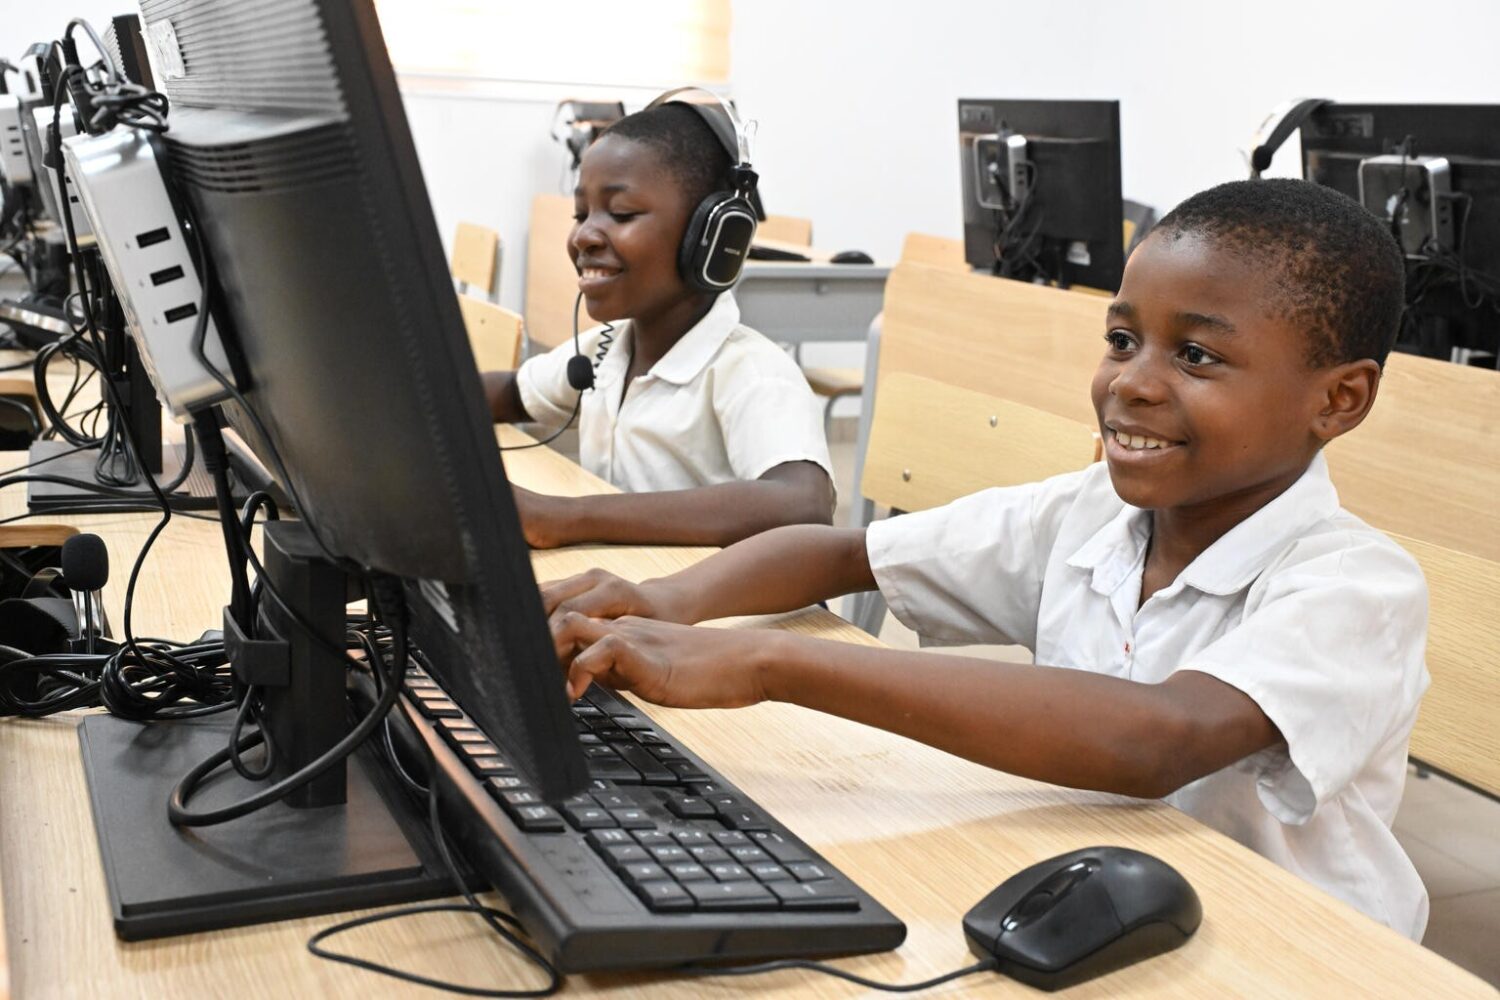 Two students working on computers in southern Côte d'Ivoire.